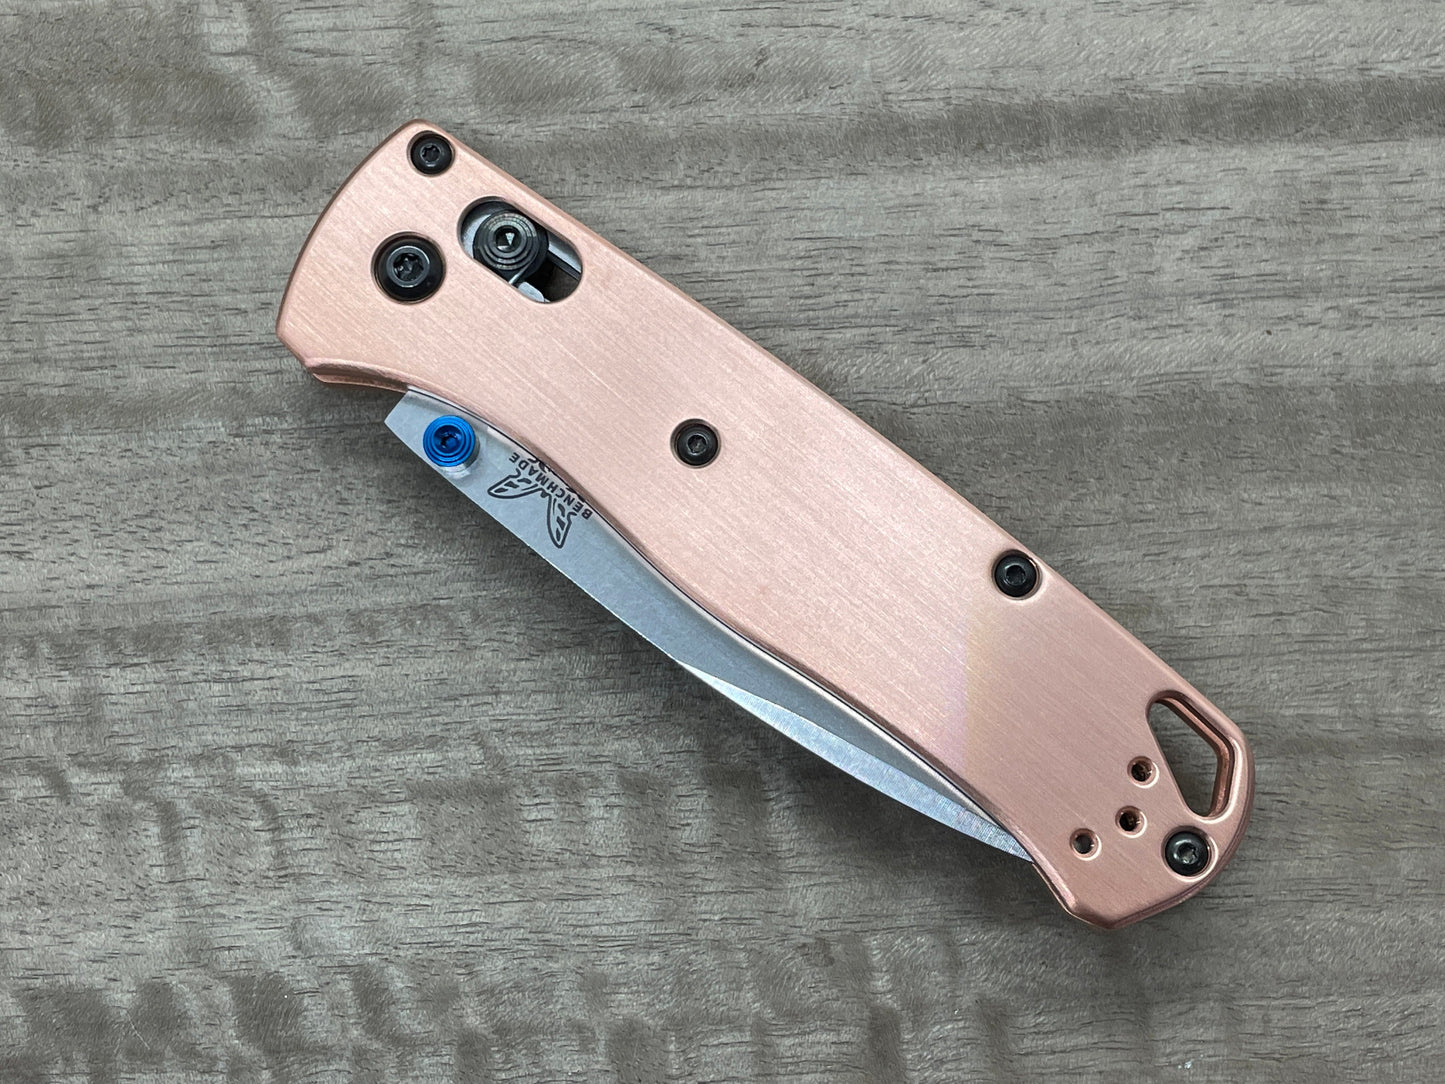 Brushed Copper Scales for Benchmade Bugout 535